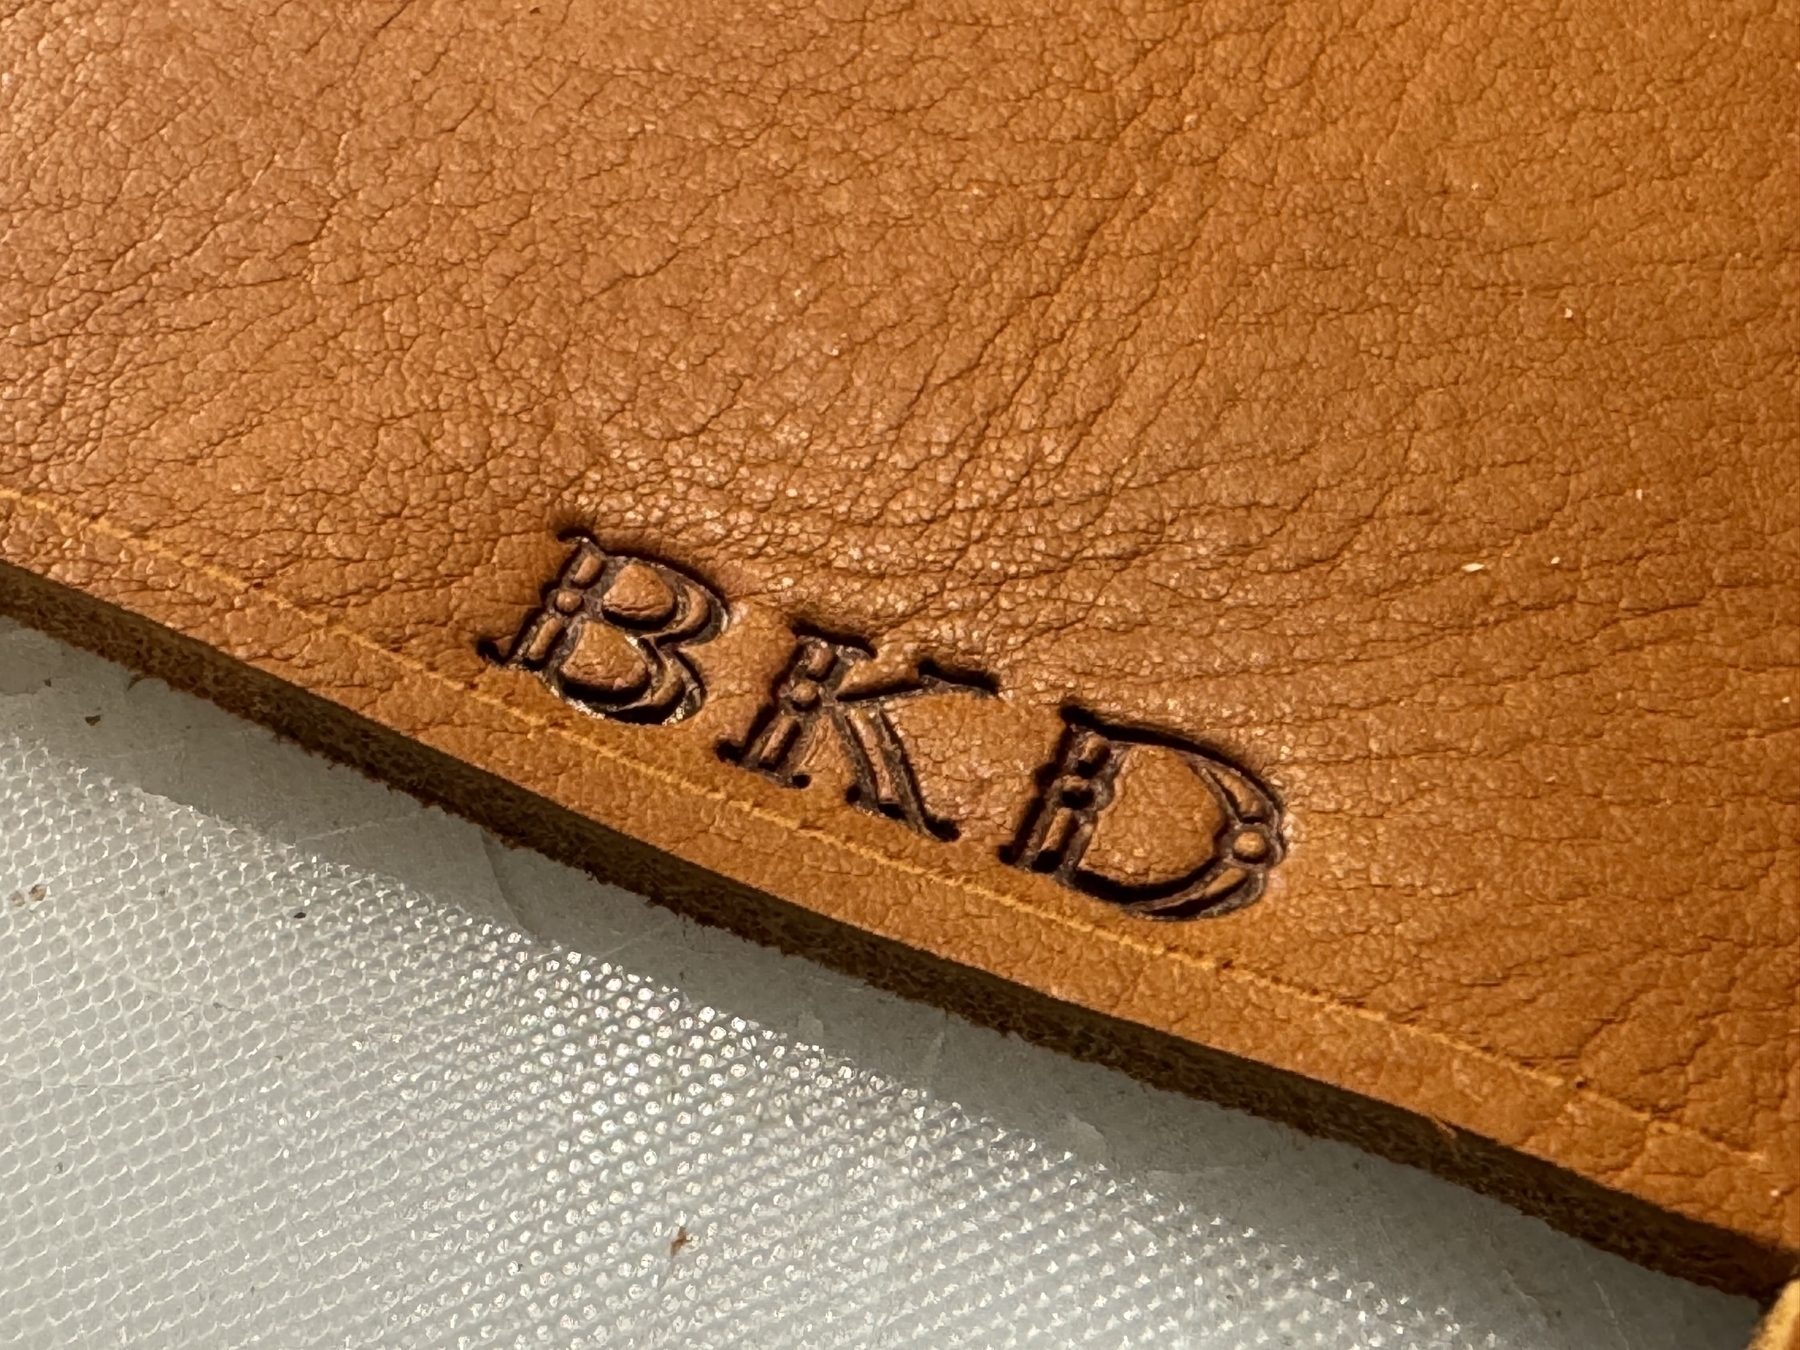 A piece of brown leather is embossed with the initials "BKD."